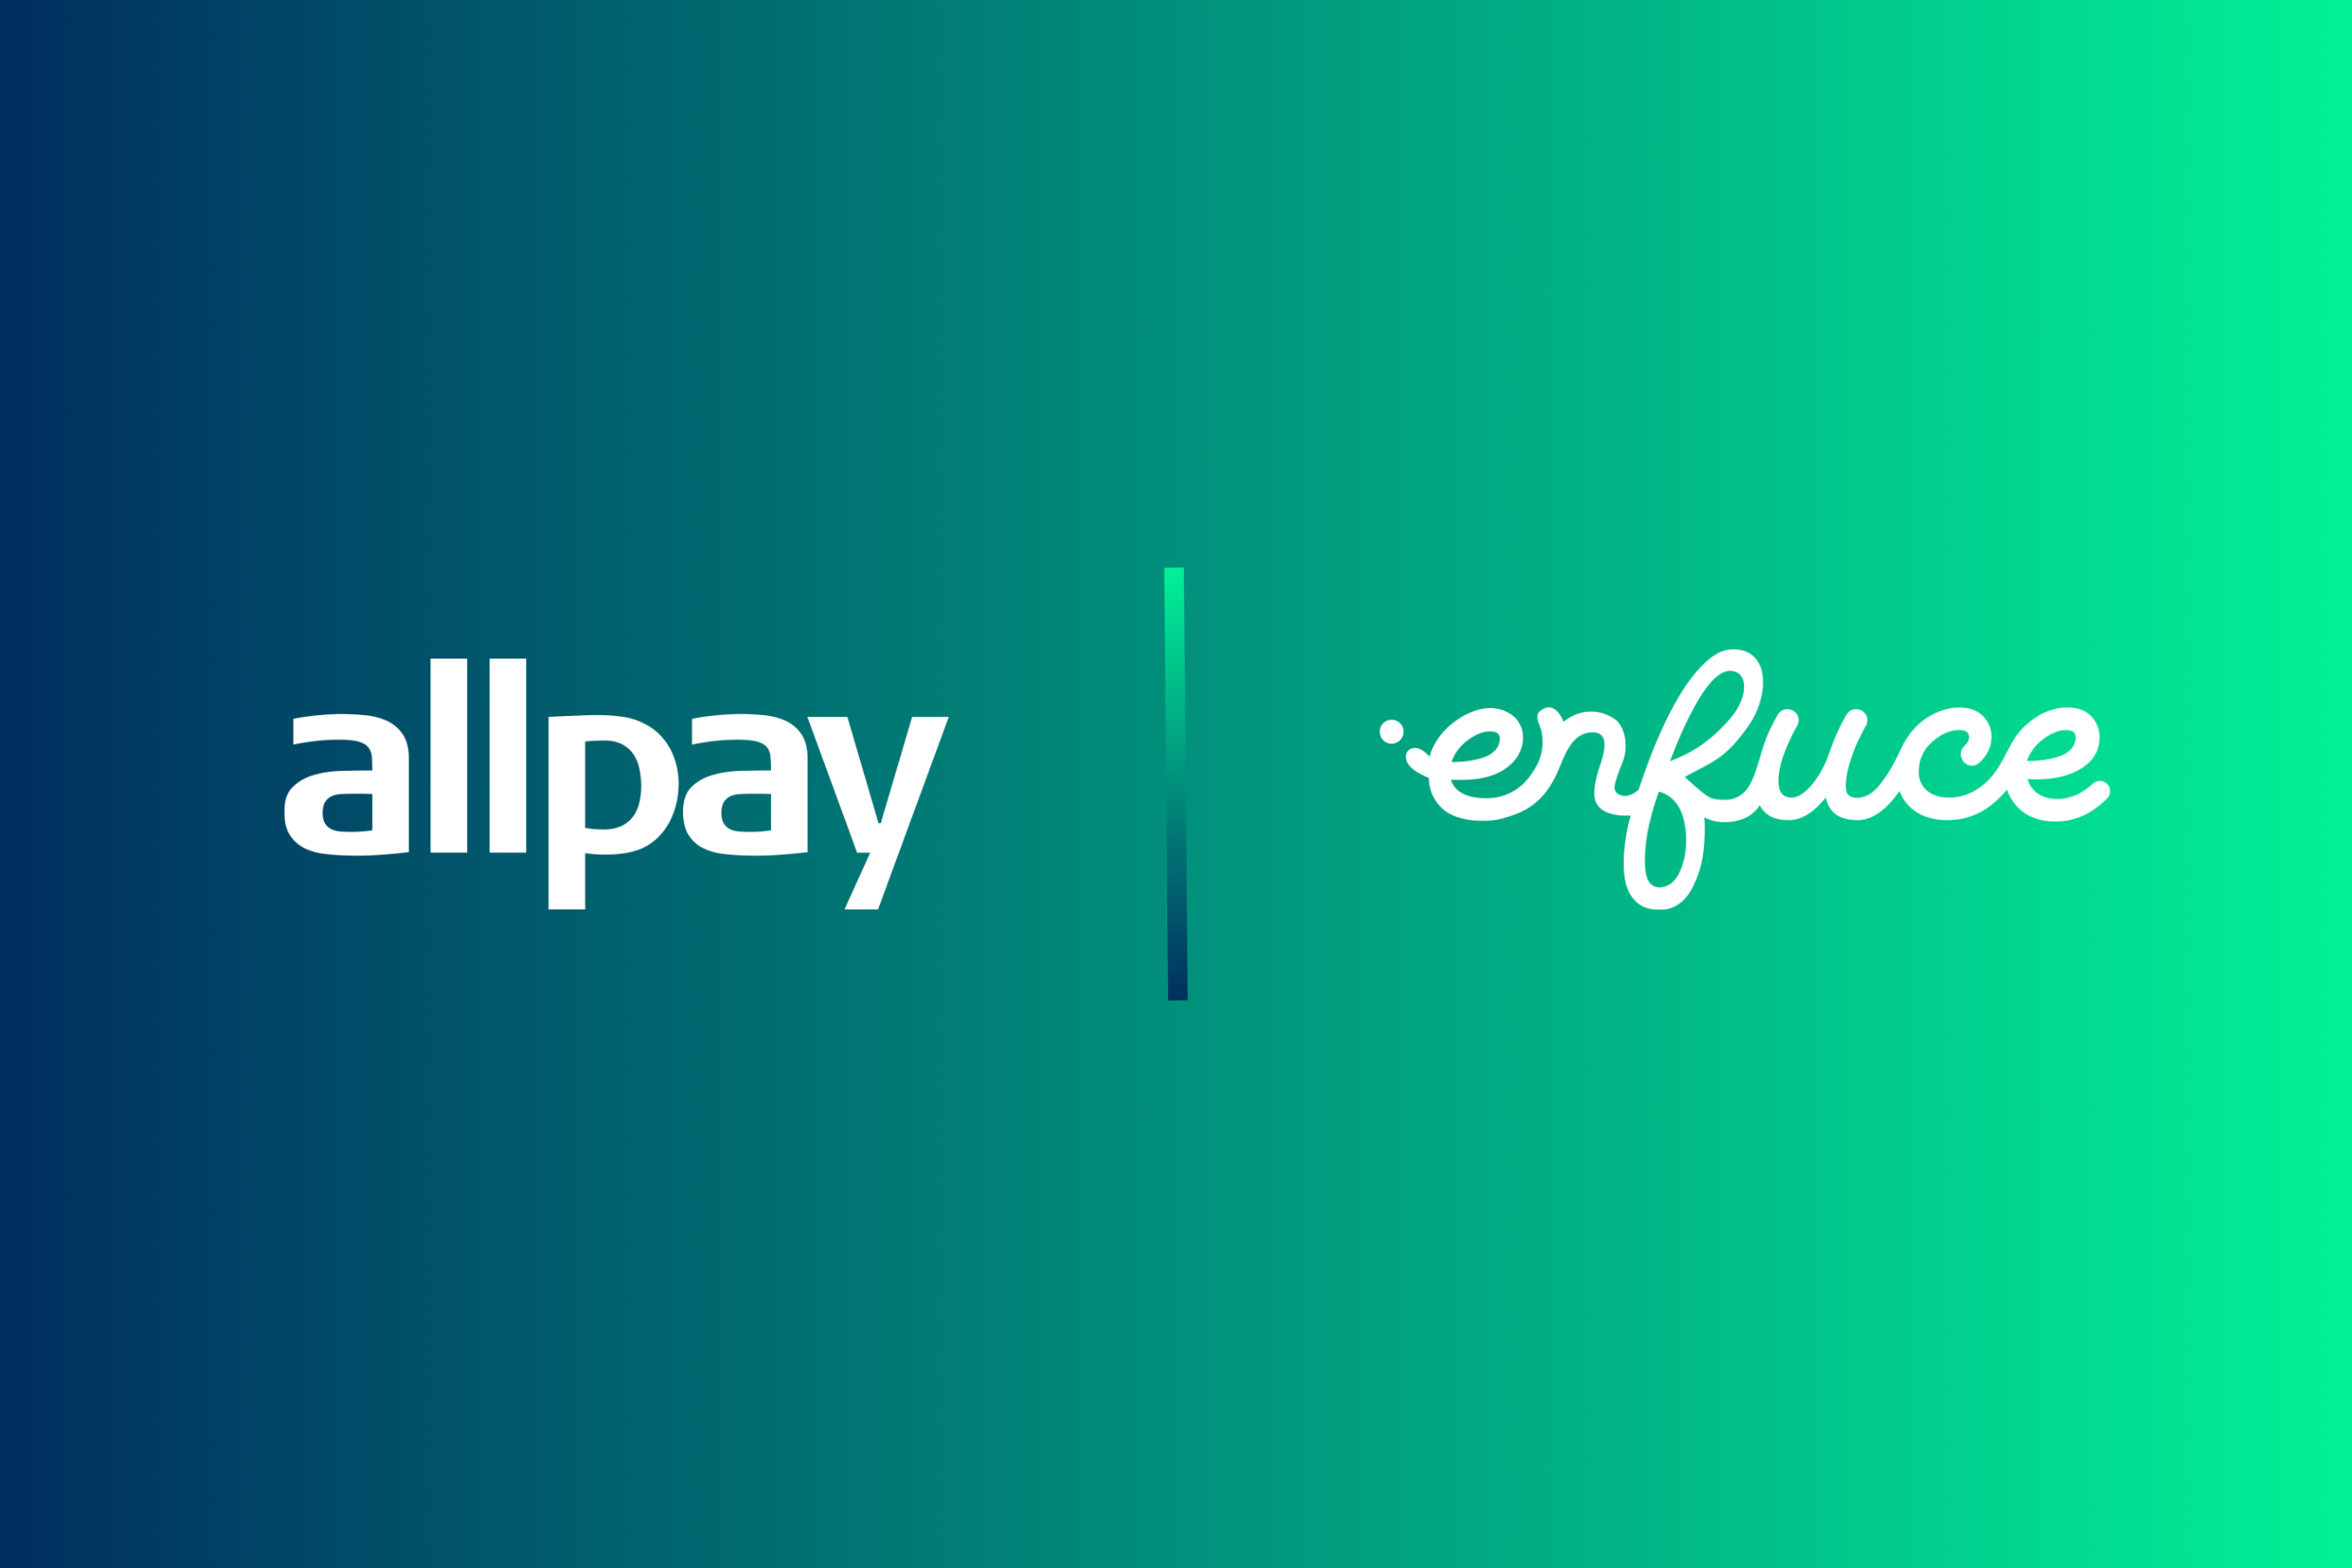 allpay partners with Enfuce to revolutionise payments for the UK public service